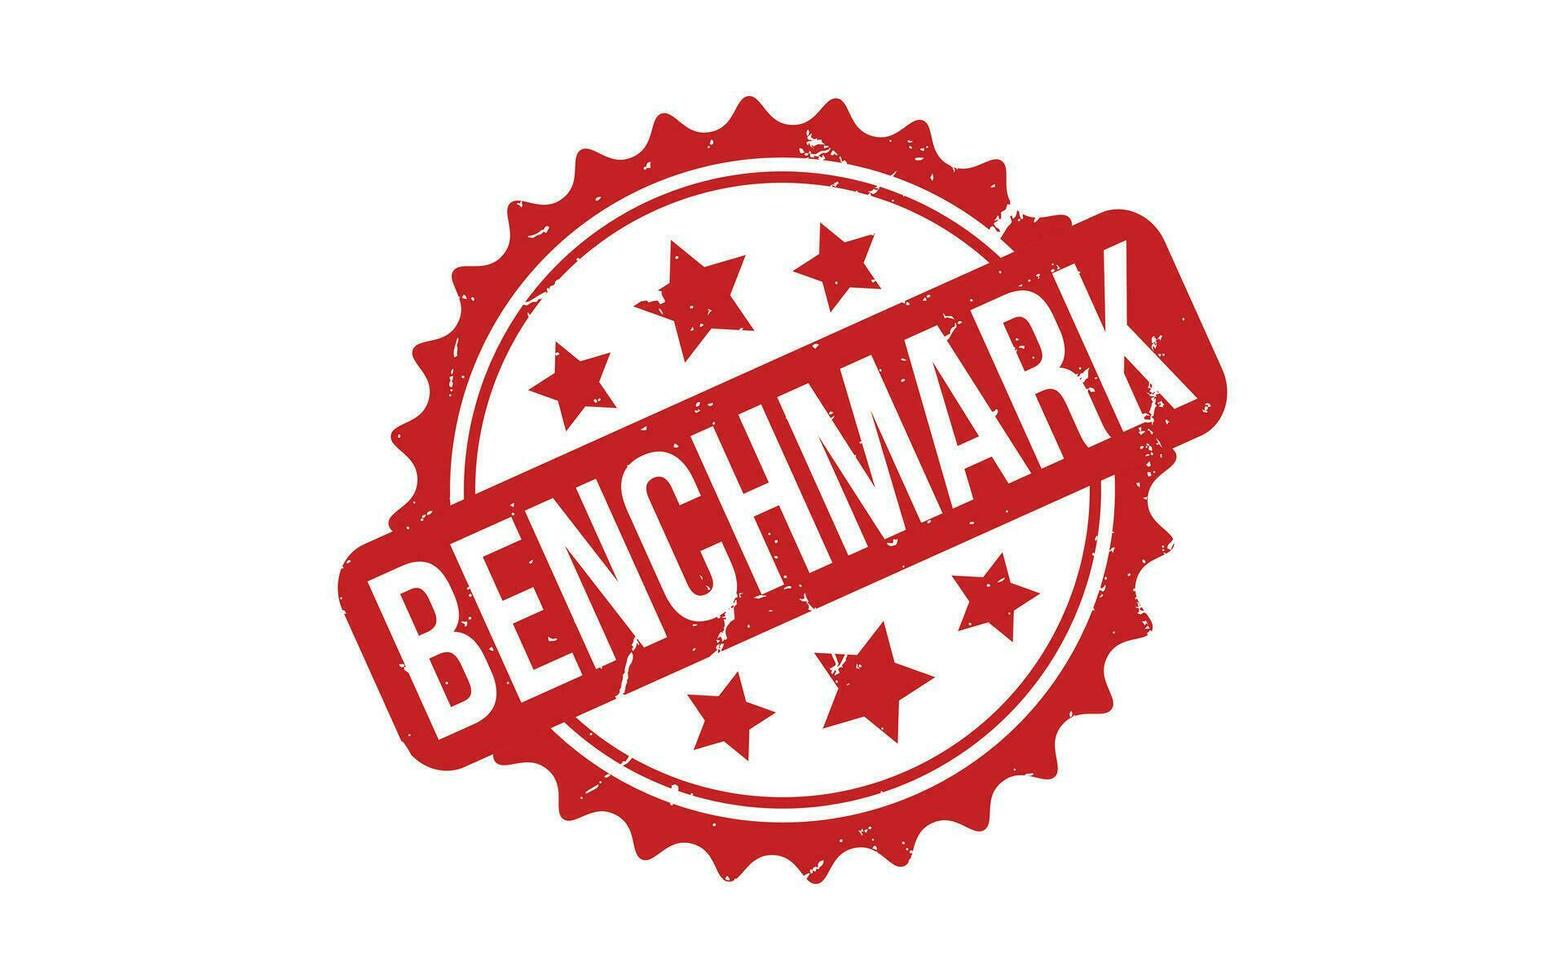 Benchmark Rubber Stamp Seal Vector